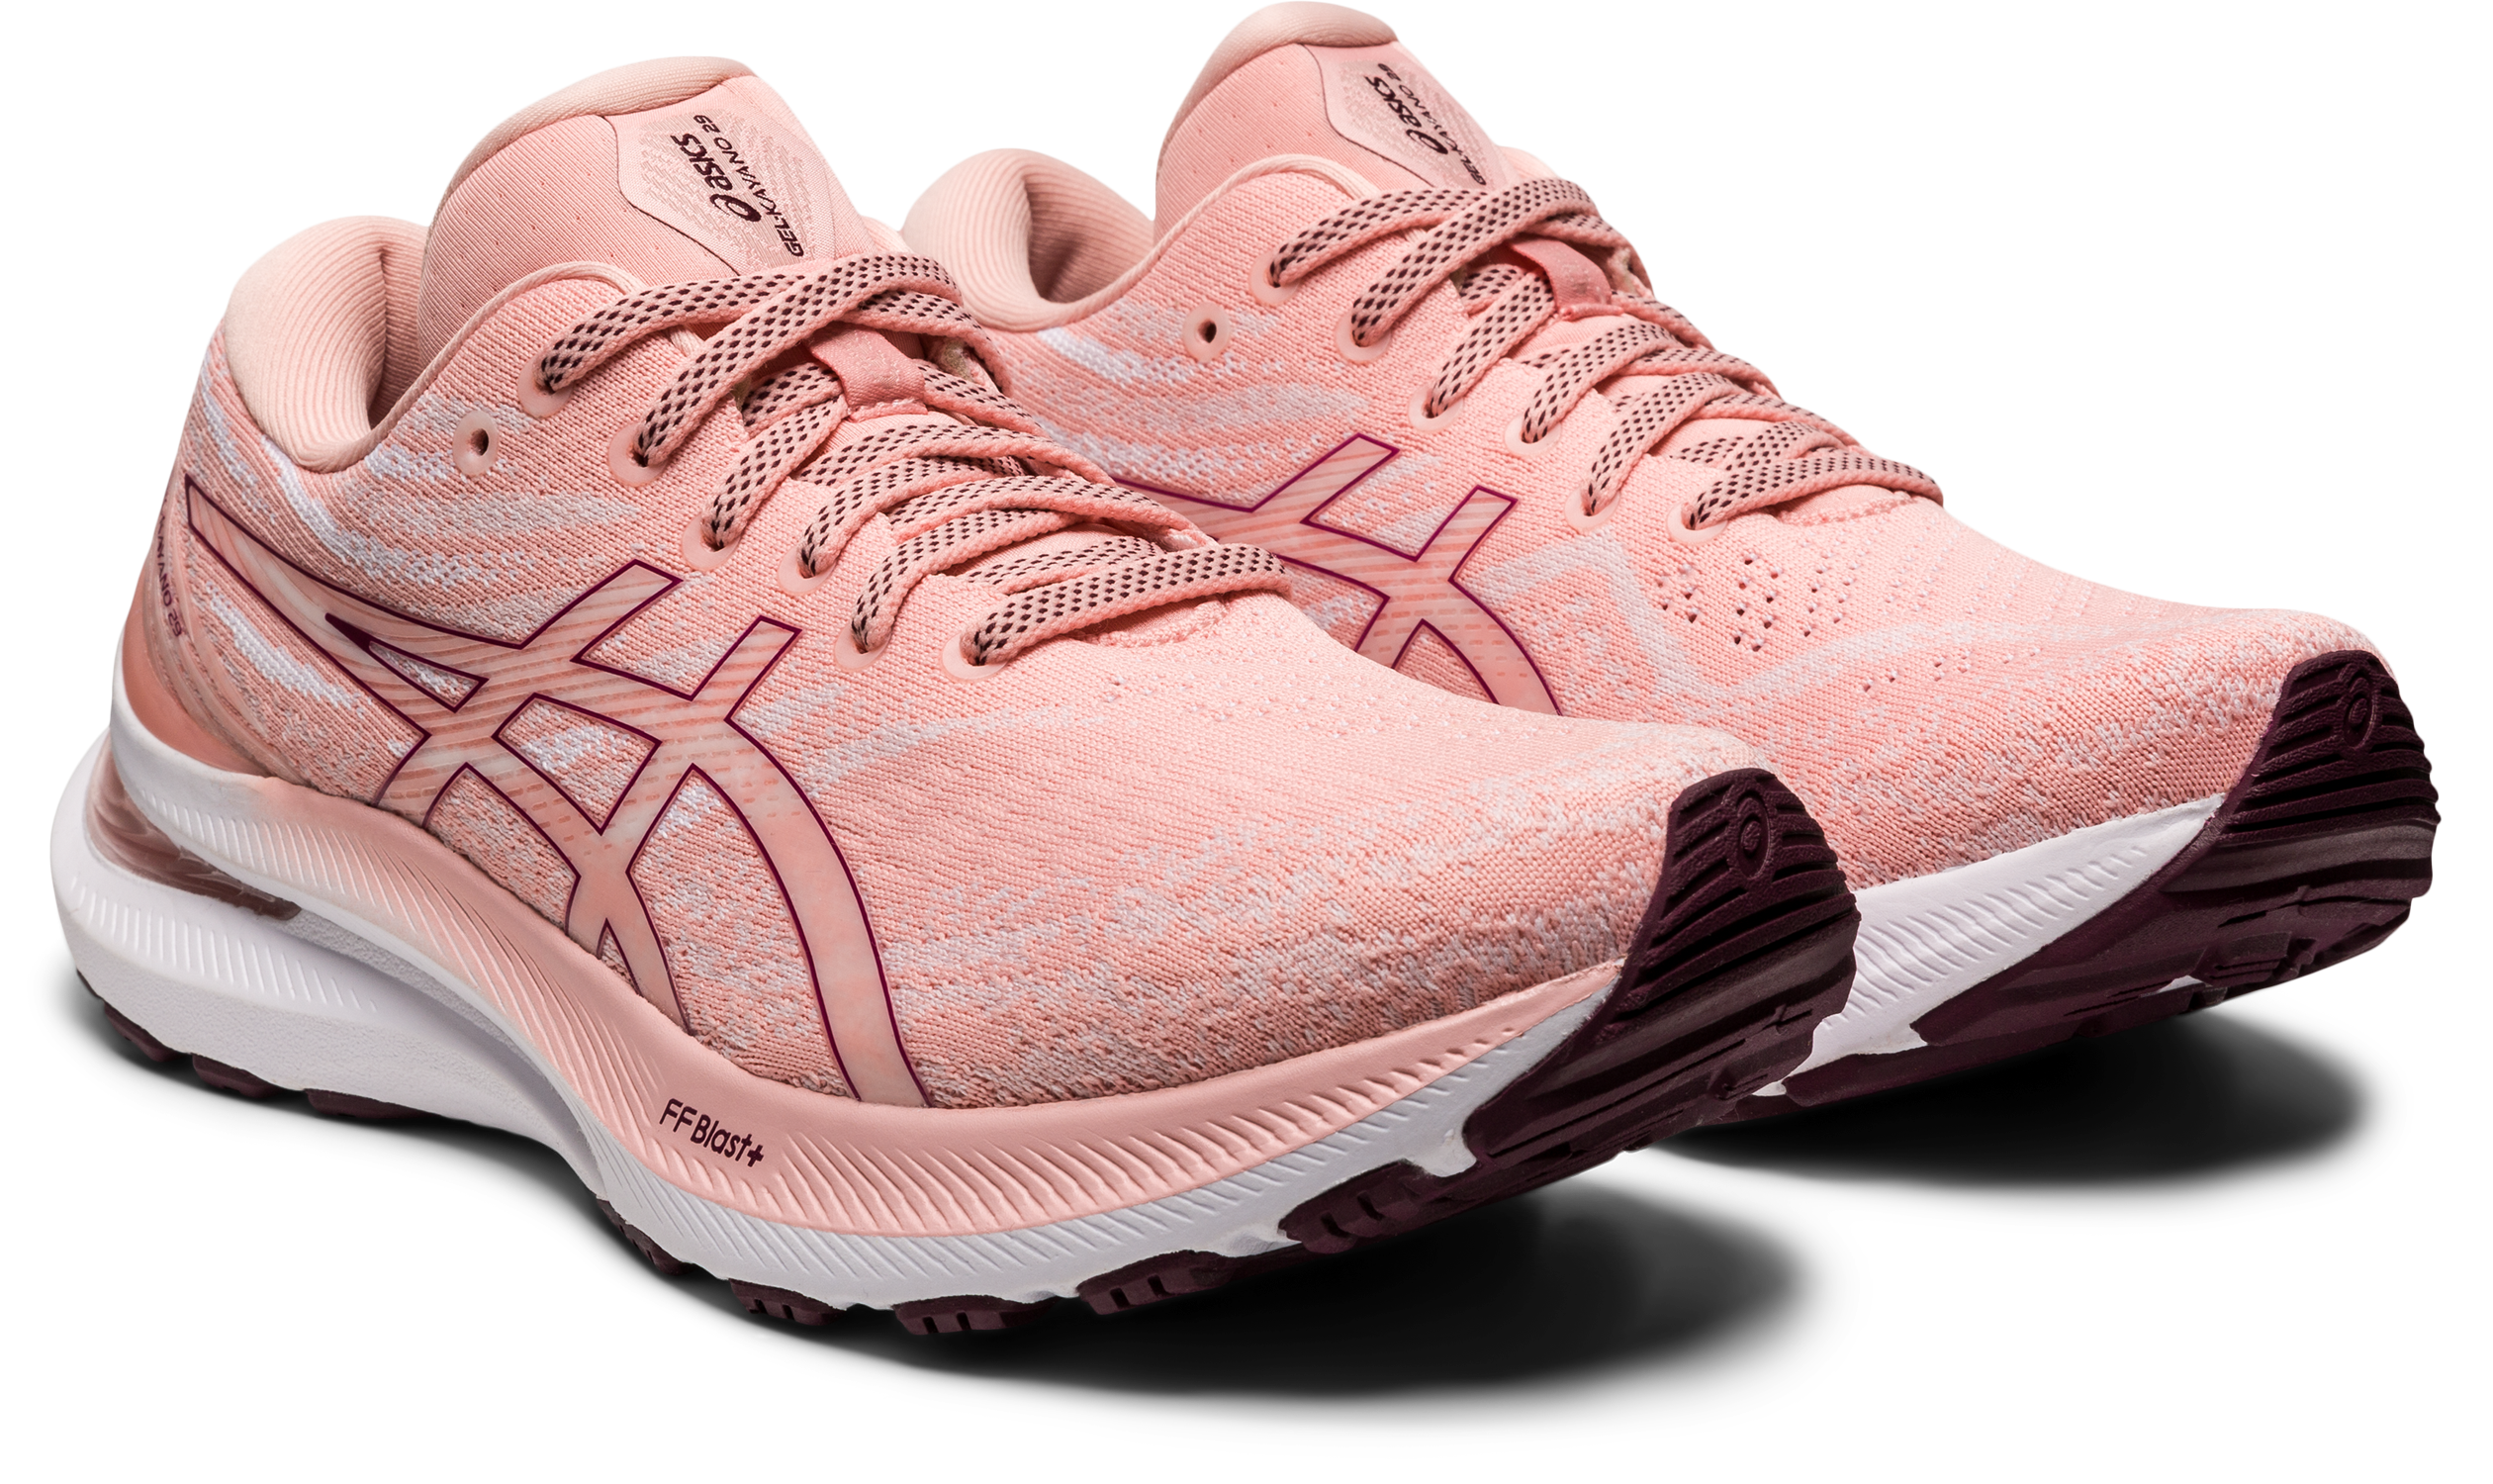 Asics Women's Gel-Kayano 29 Running Shoes in Frosted Rose/Deep Mars